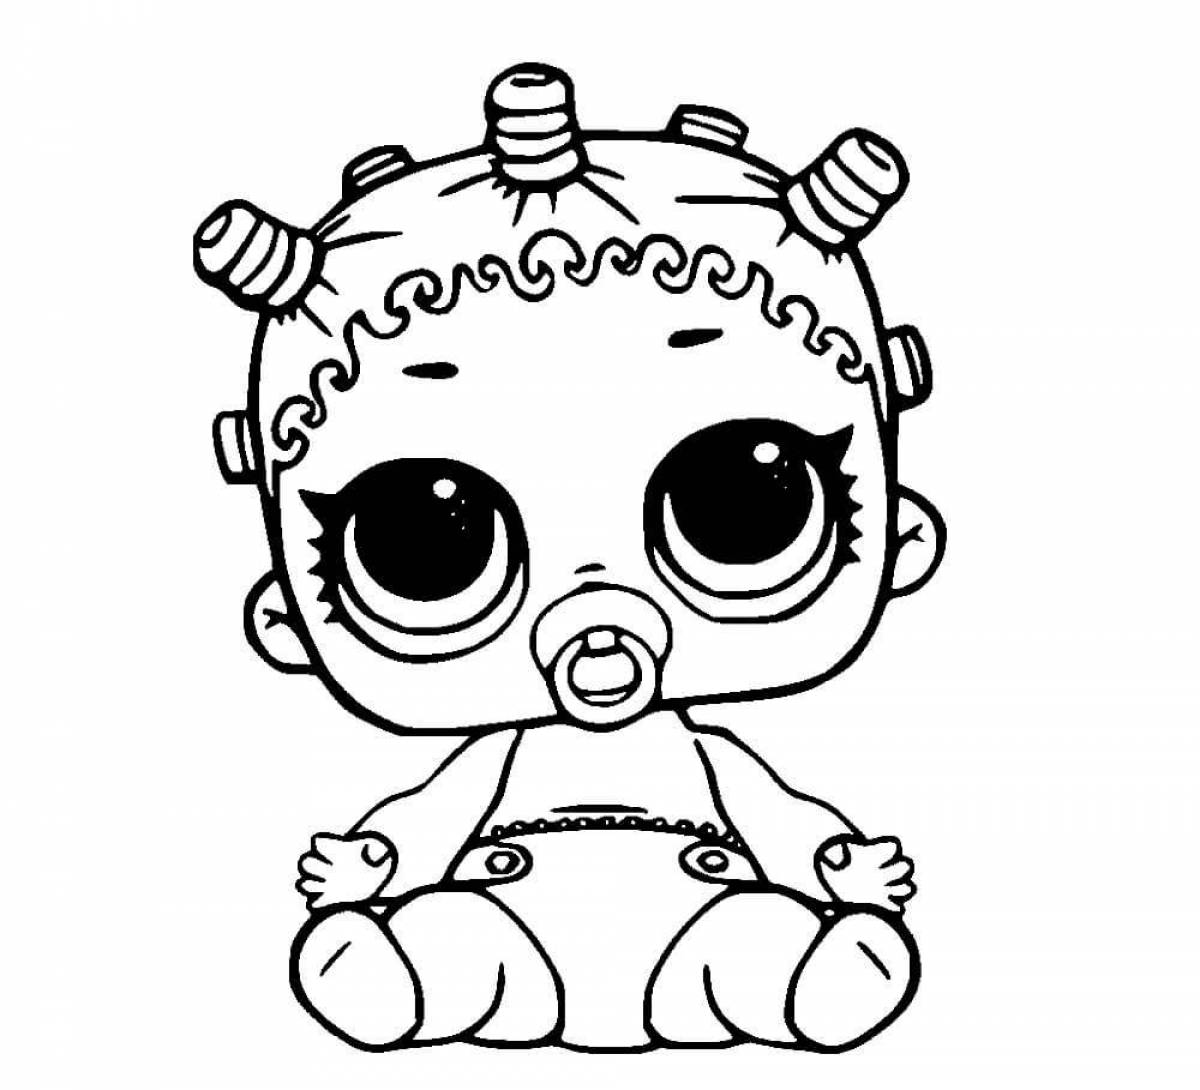 Coloring pages glowing lola dolls for kids